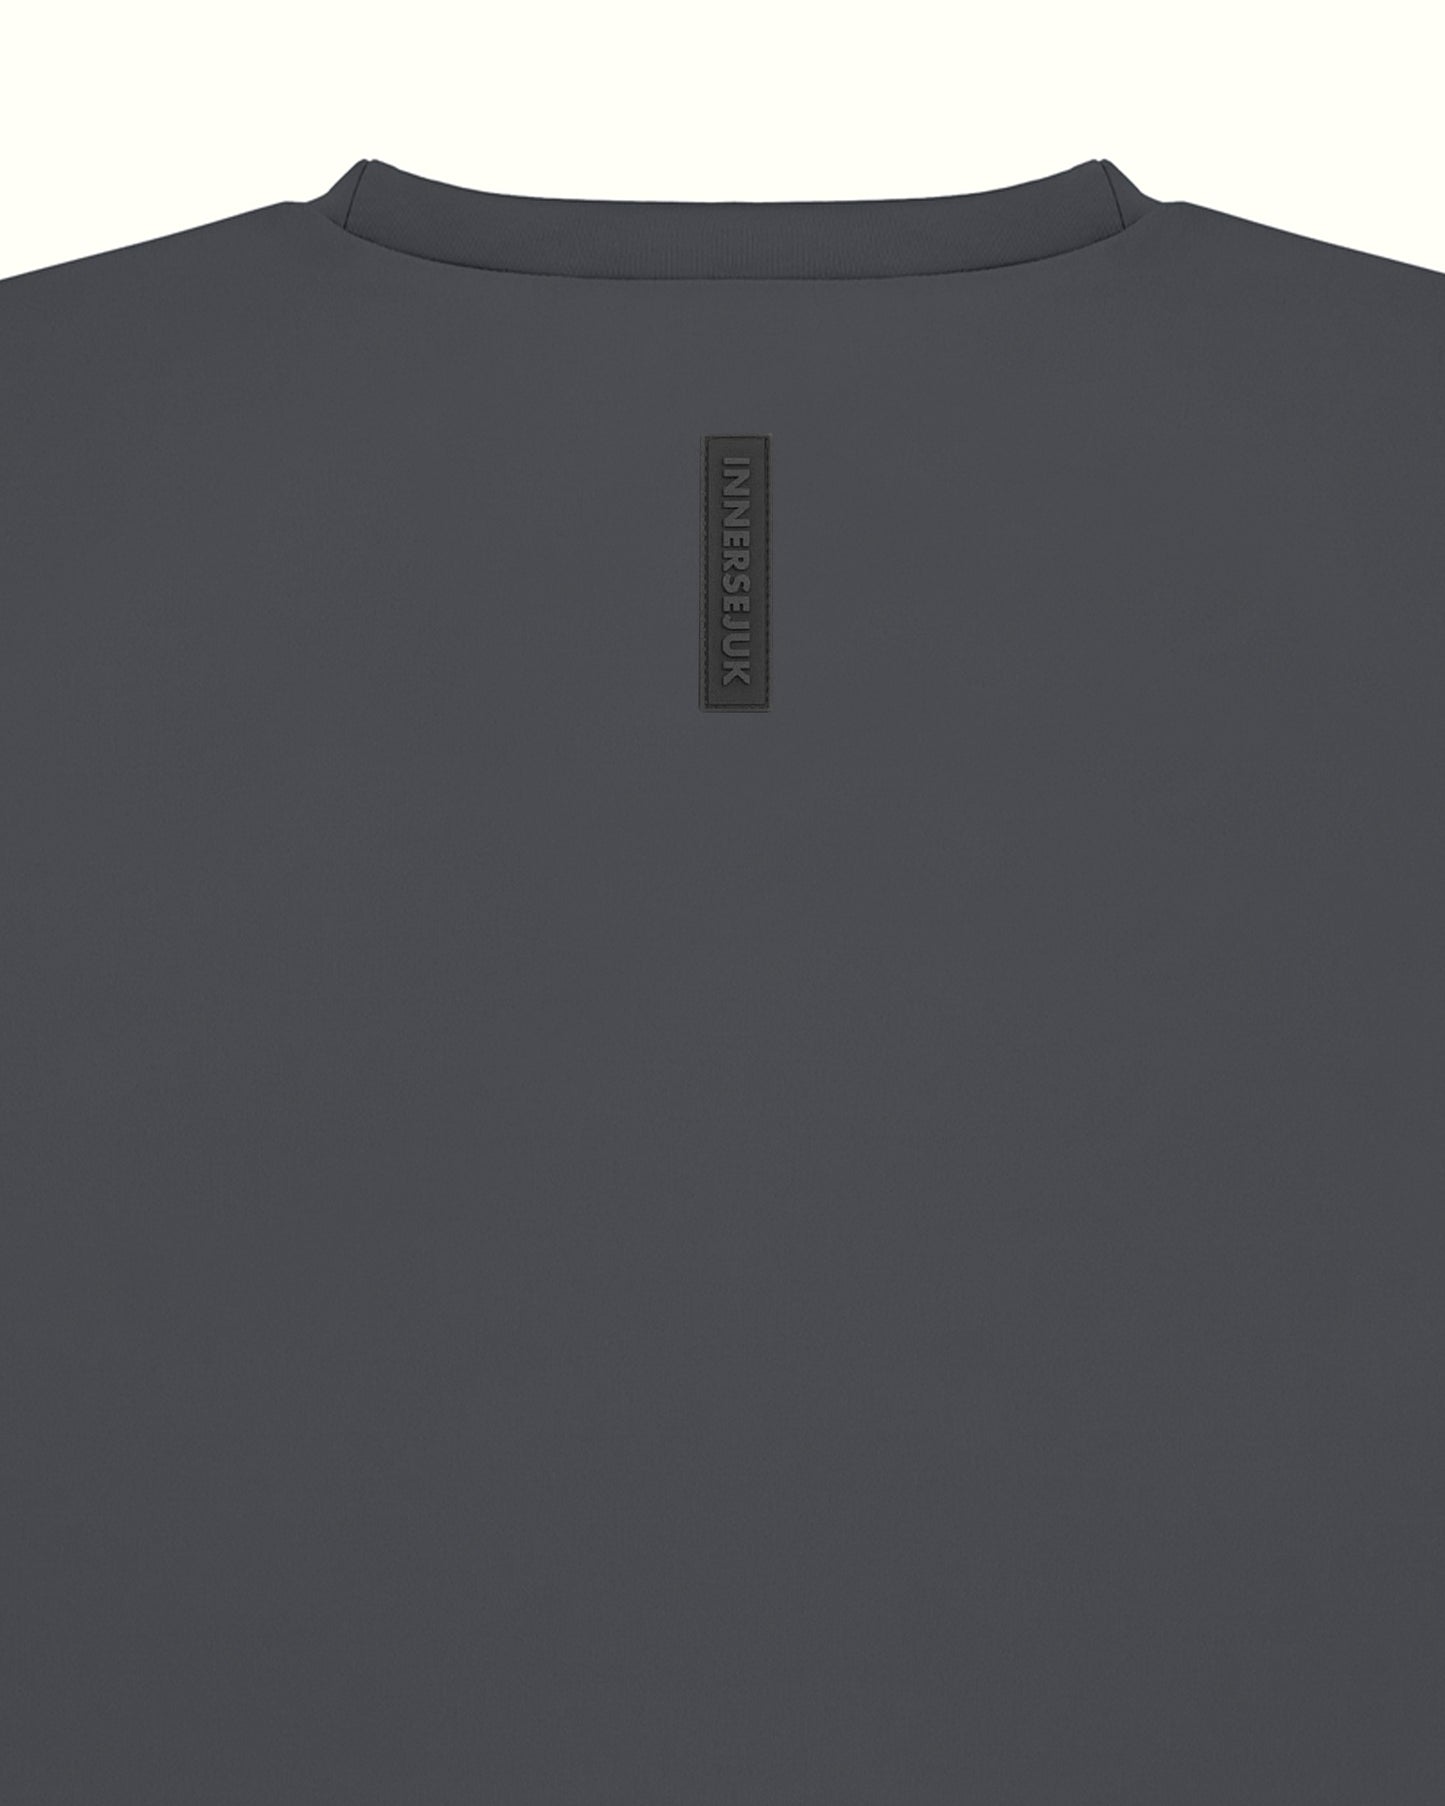 THE SIGNATURE RELAXED TEE IN DARK GREY